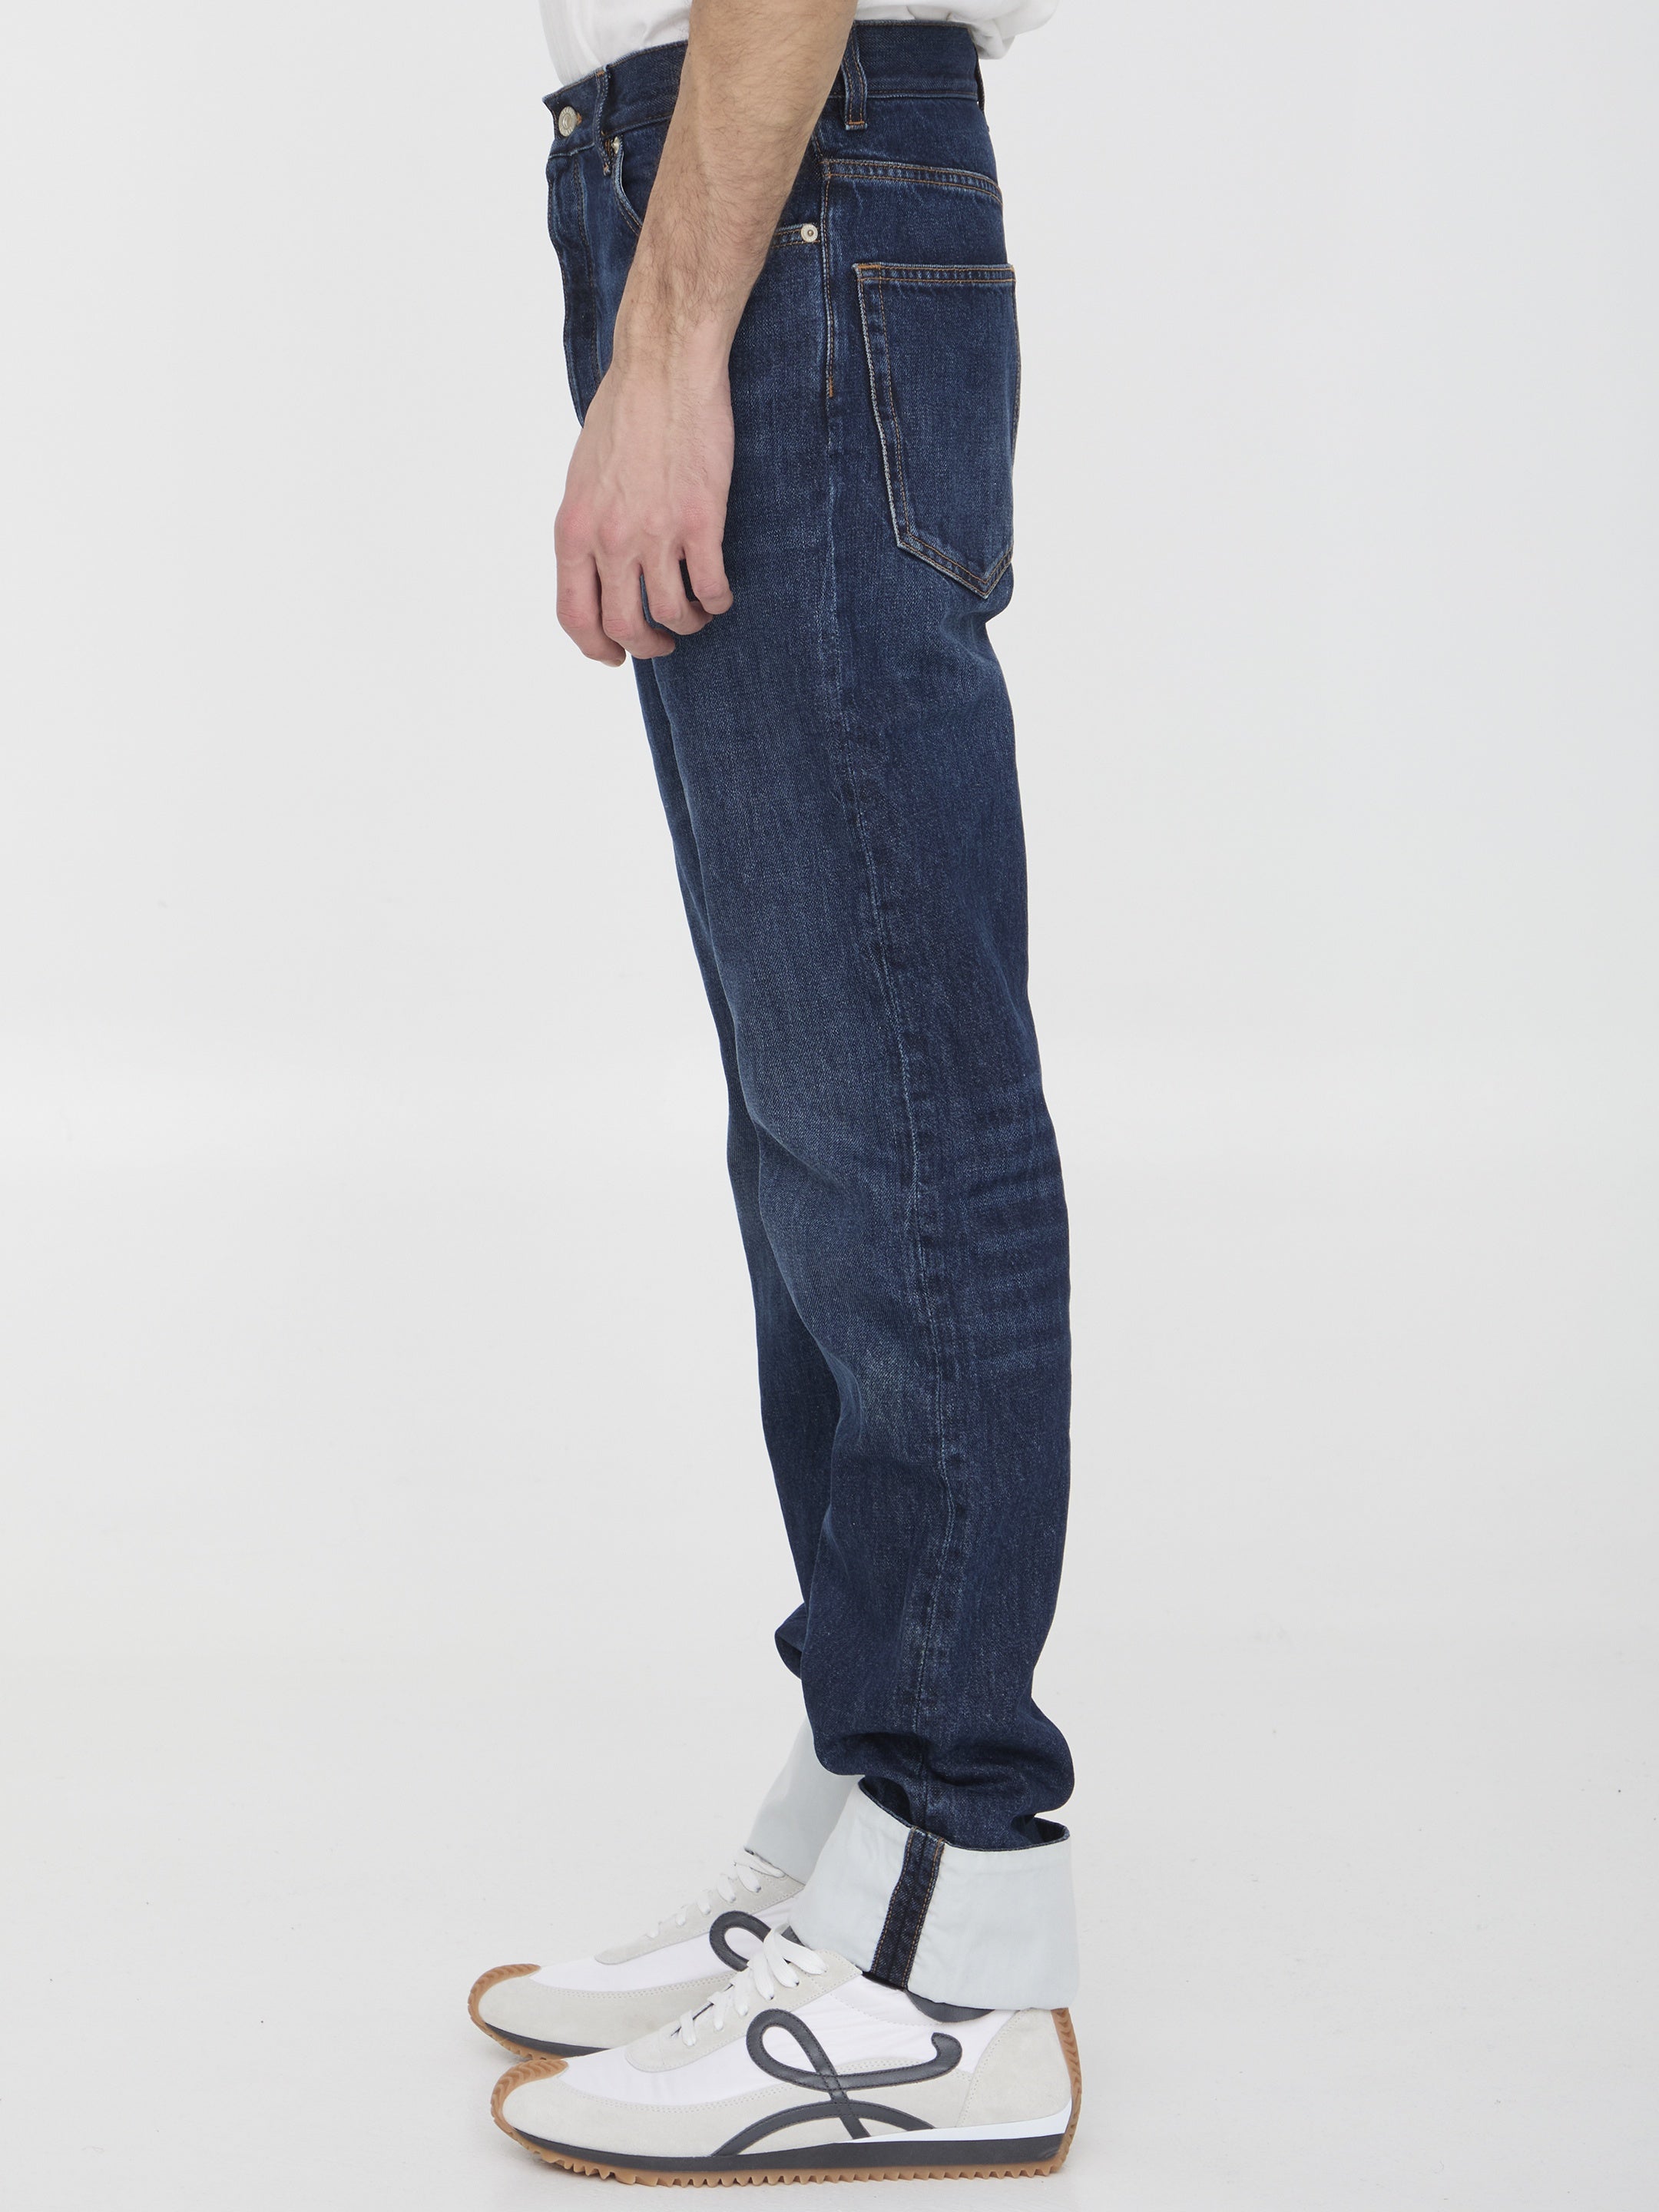 LOEWE-OUTLET-SALE-Fisherman-turn-up-jeans-Jeans-ARCHIVE-COLLECTION-3.jpg